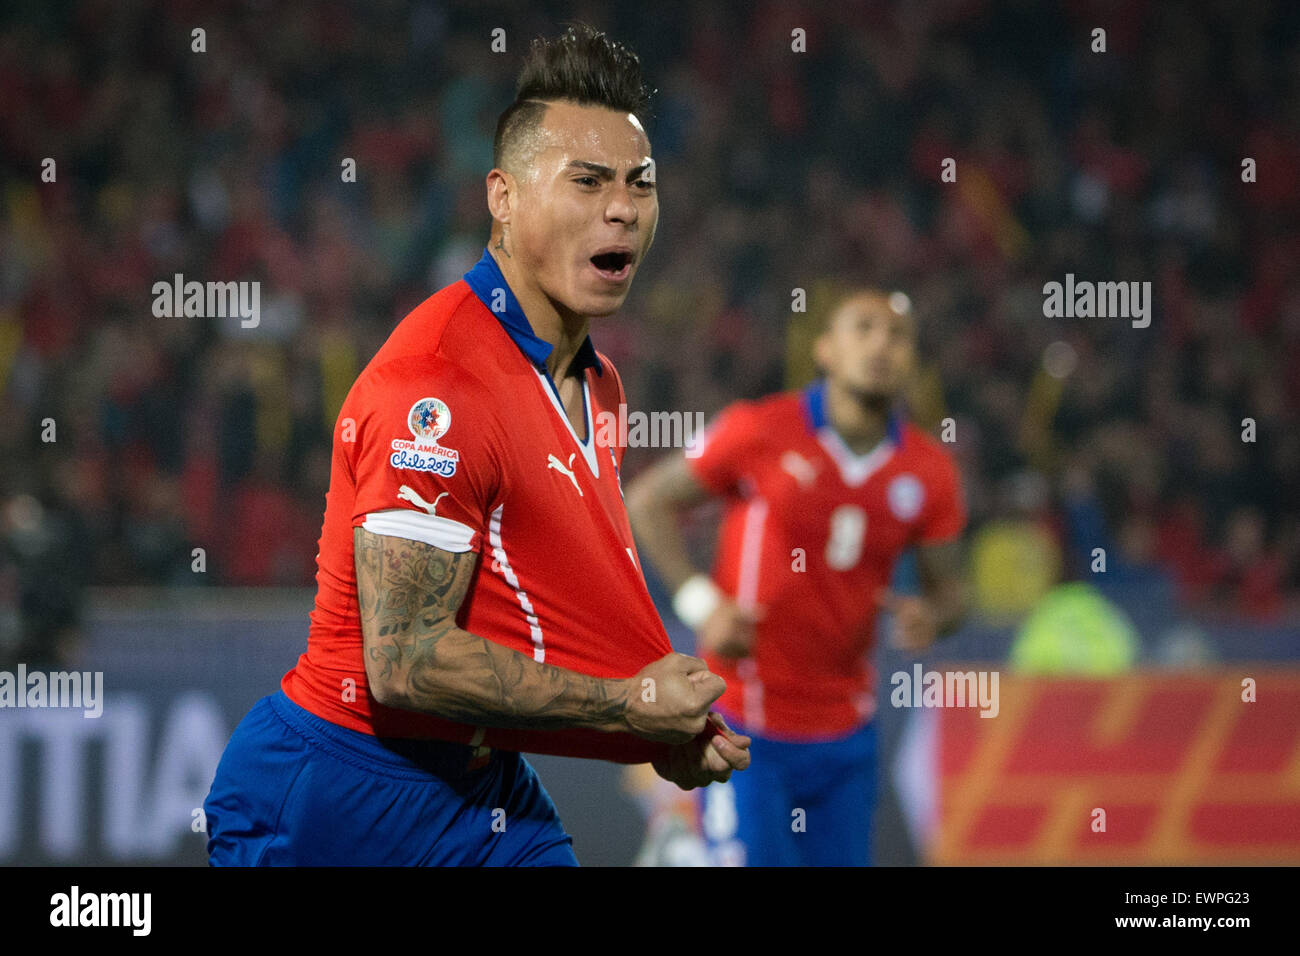 Santiago, Chile. 29th June, 2015. Eduardo Vargas from Chile celebrates scoring against Peru during the Copa America Chile 2015 semifinal match, held at National Stadium, in Santiago, Chile, on June 29, 2015. Chile won 2-1 Credit:  Pedro Mera/Xinhua/Alamy Live News Stock Photo